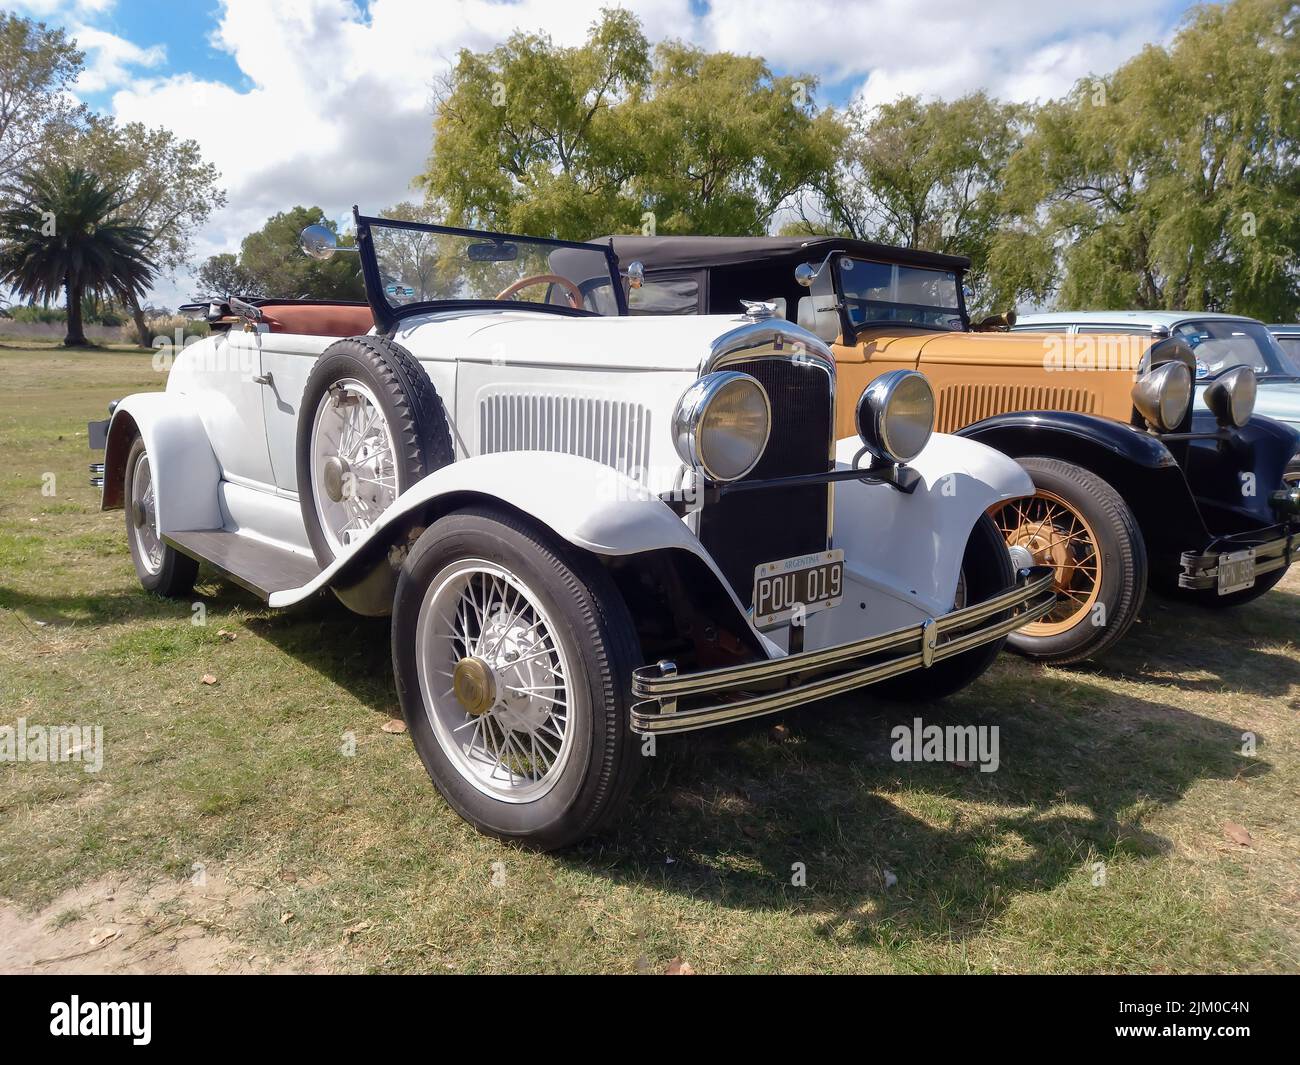 Chascomus, Argentina - Apr 9, 2022: Old white Chrysler Plymouth roadster circa 1930 parked in the countryside. Nature grass and trees background. Clas Stock Photo